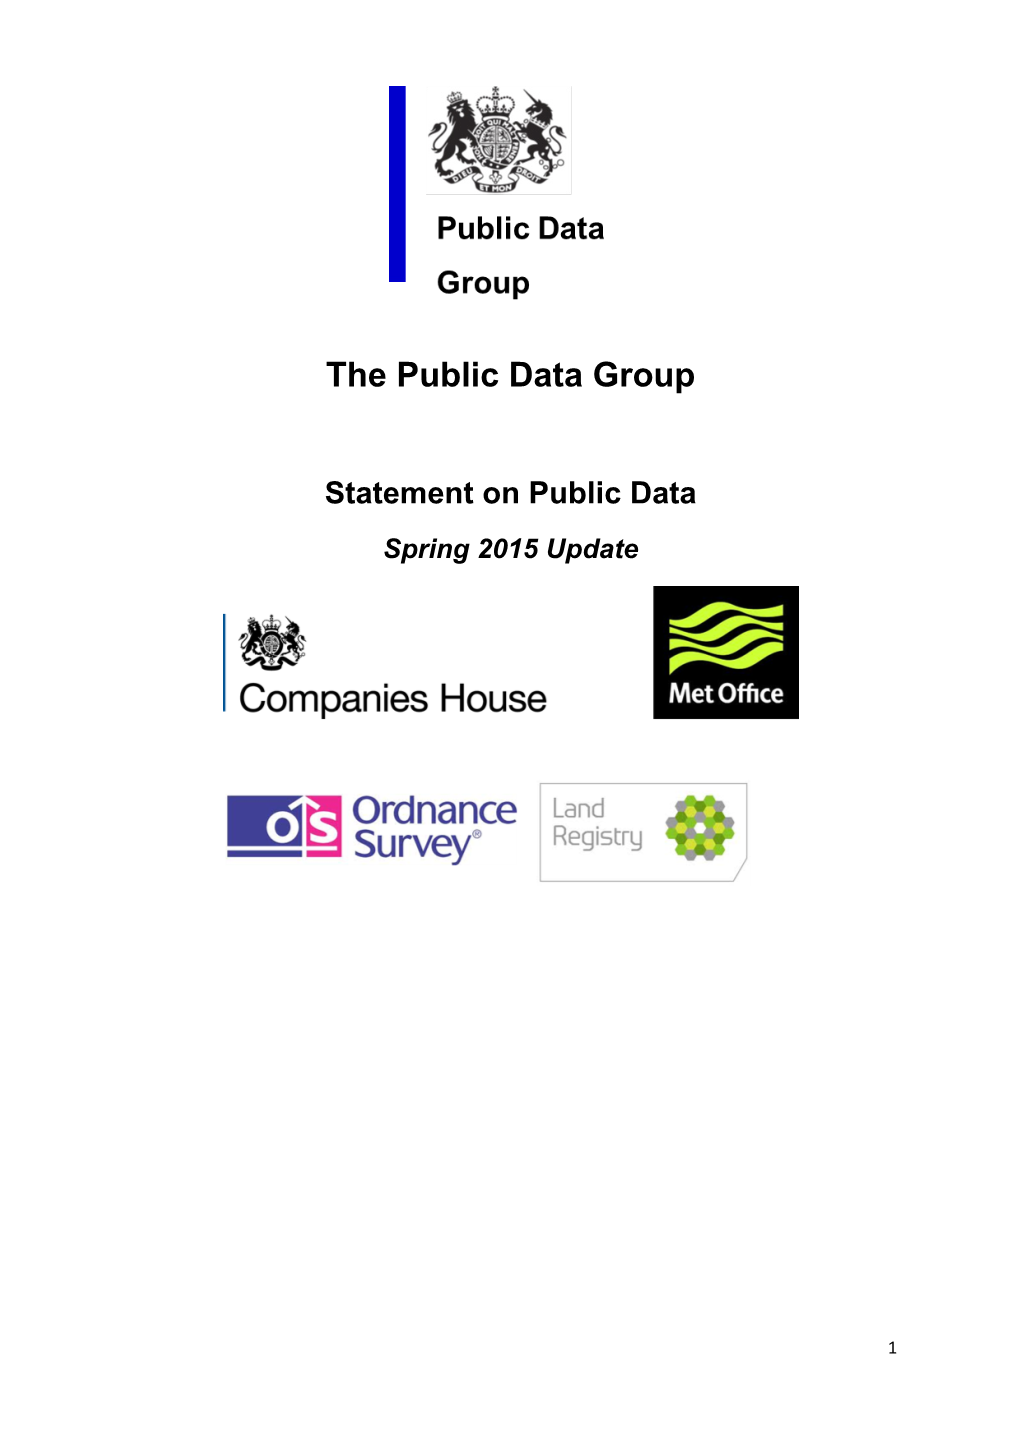 The Public Data Group